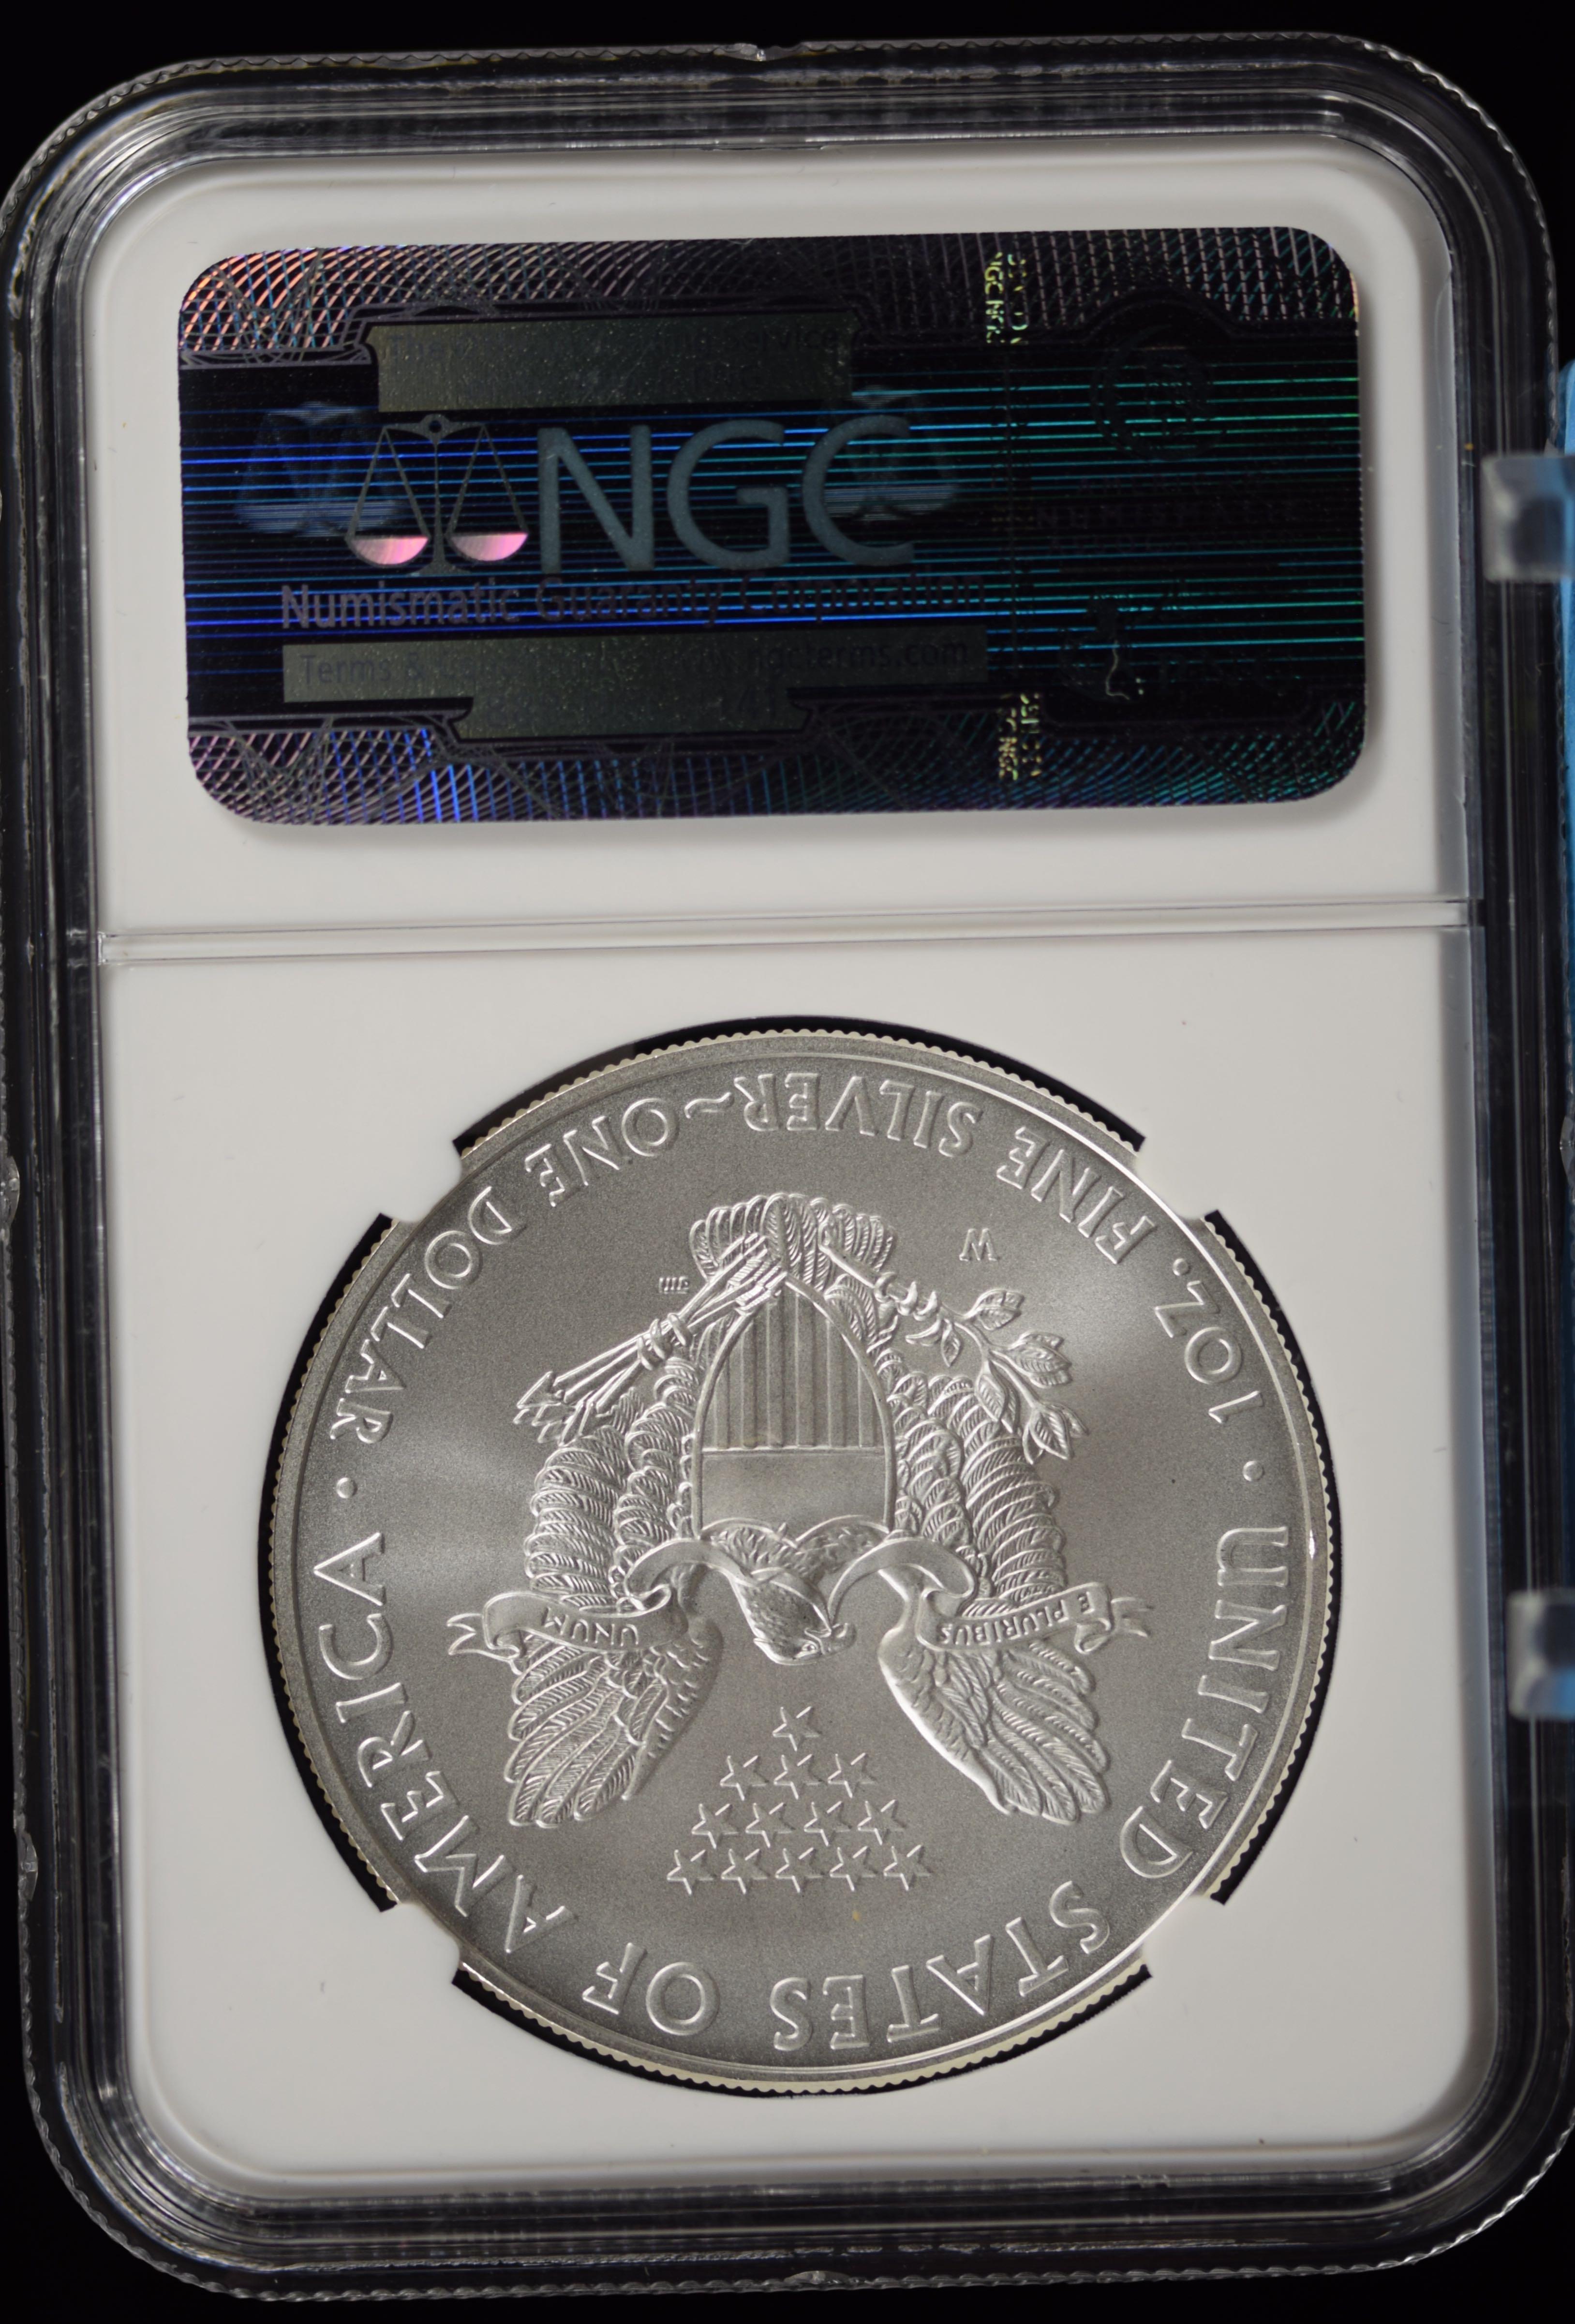 2008 American Silver Eagle NGC MS-70 Gold Star